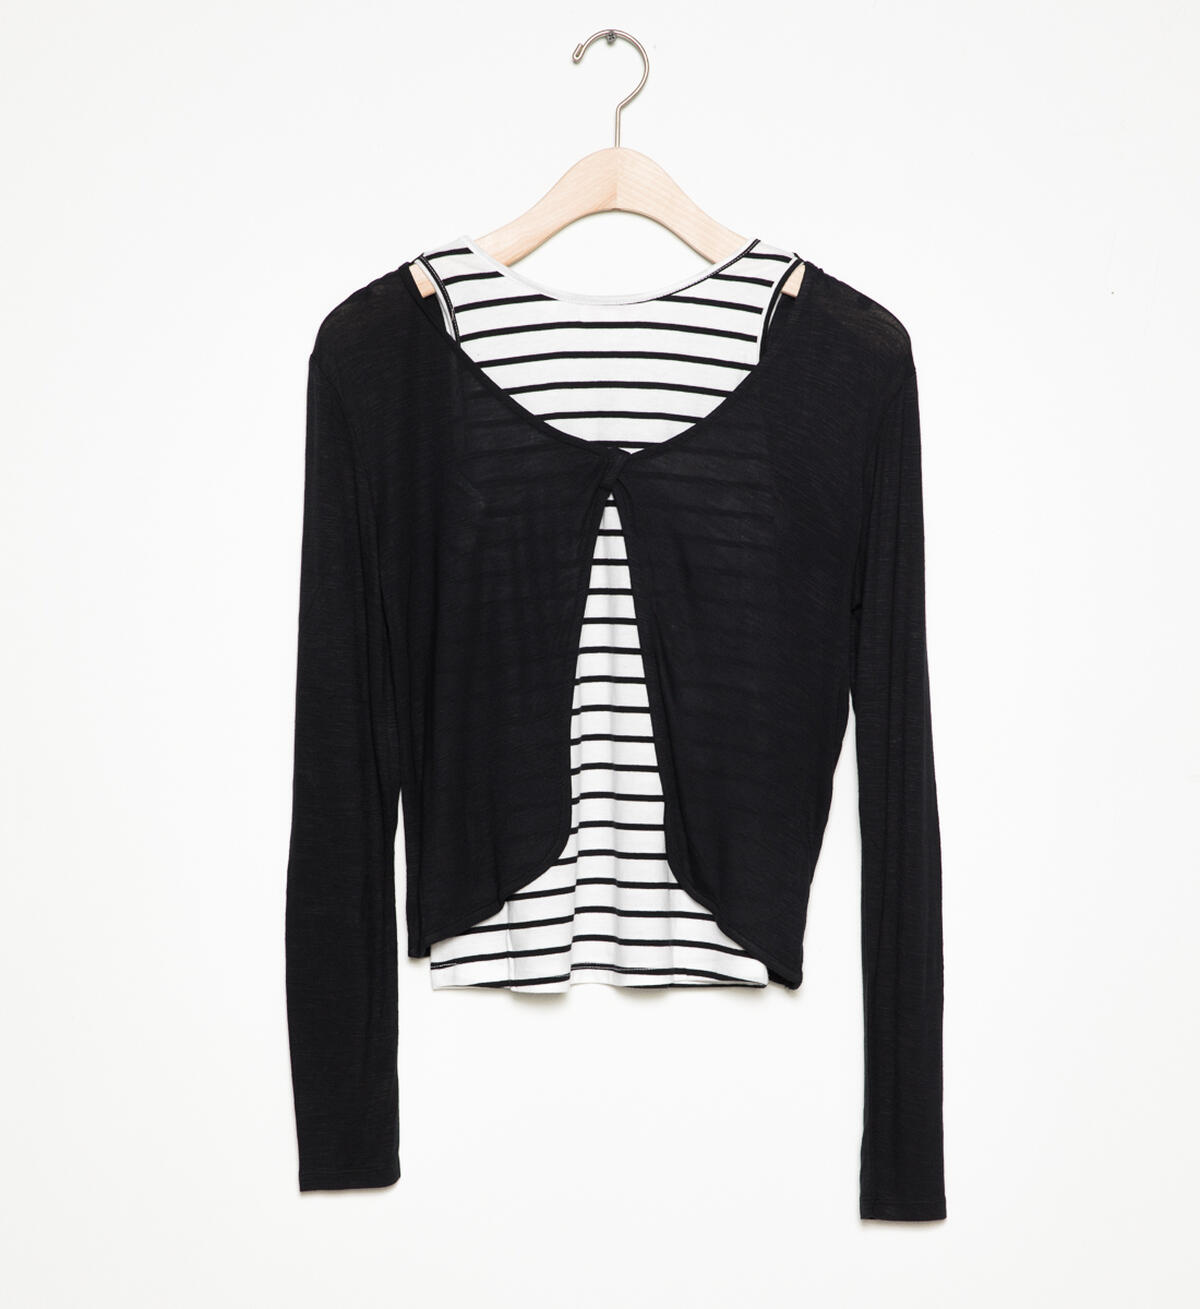 Long-Sleeve Layered Top (4-7), , hi-res image number 0